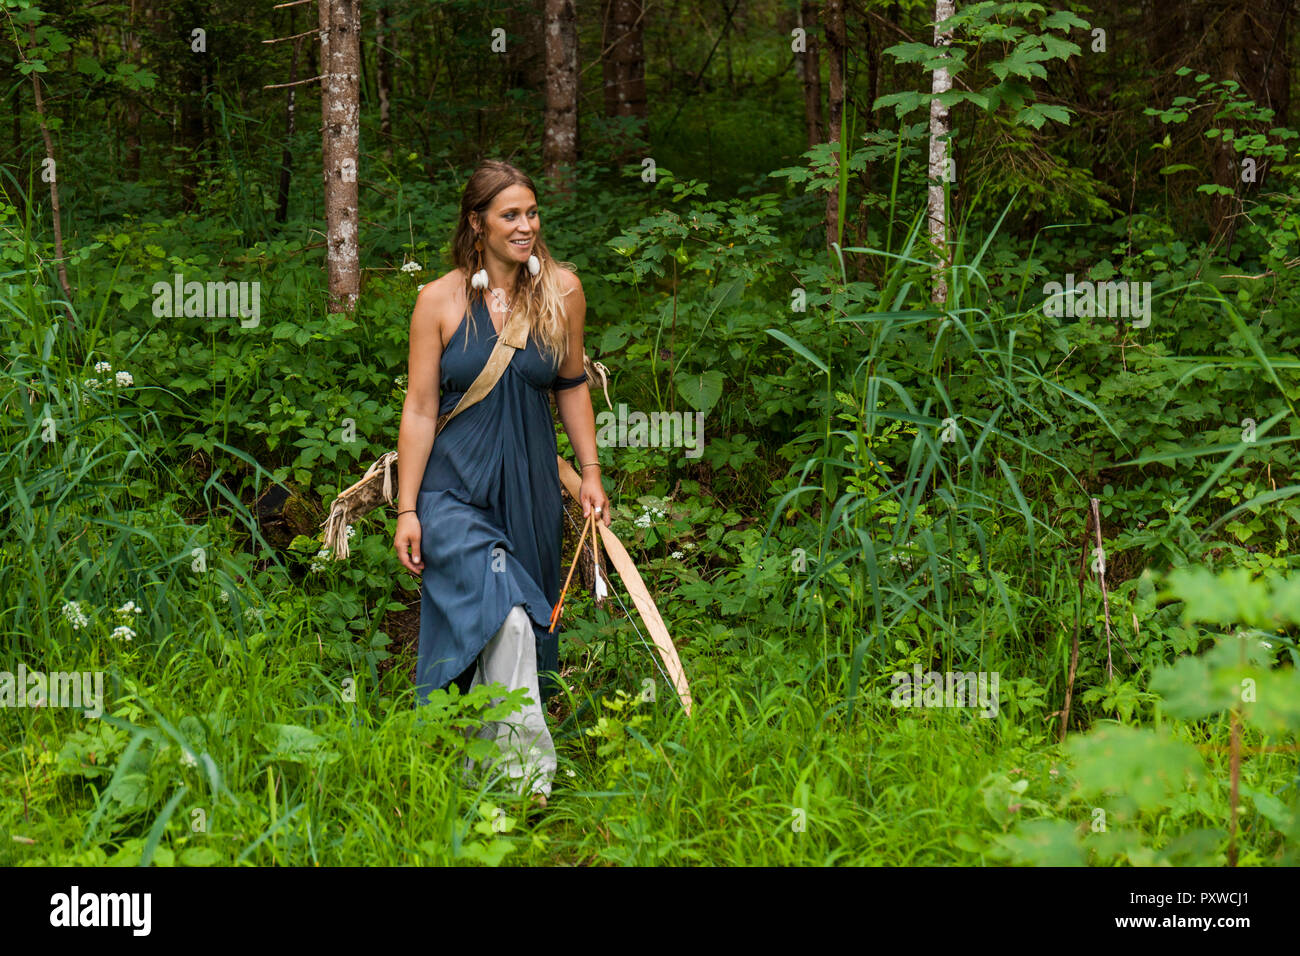 Smiling woman walking in a forest with bow and arrow Stock Photo